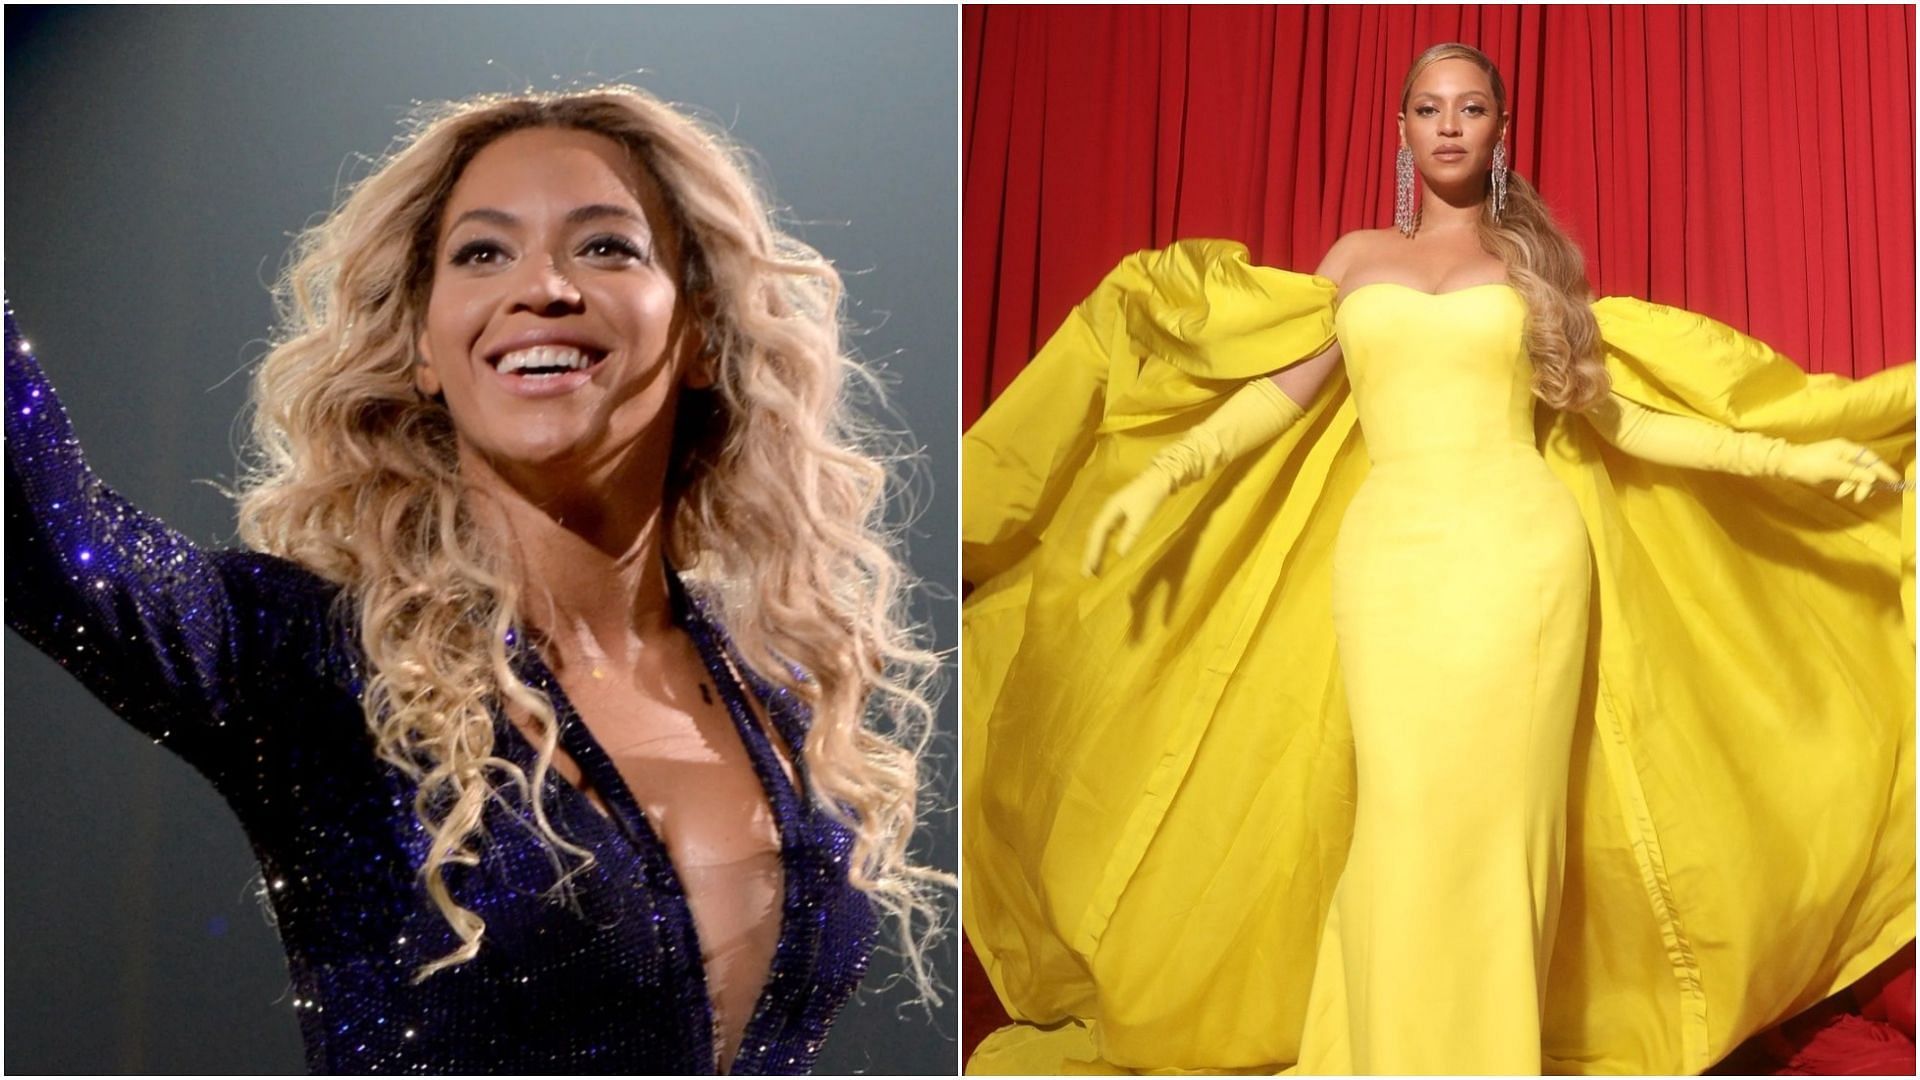 Beyonce&#039;s Alien Superstar has taken the internet by storm. (Images via Getty and Instagram)